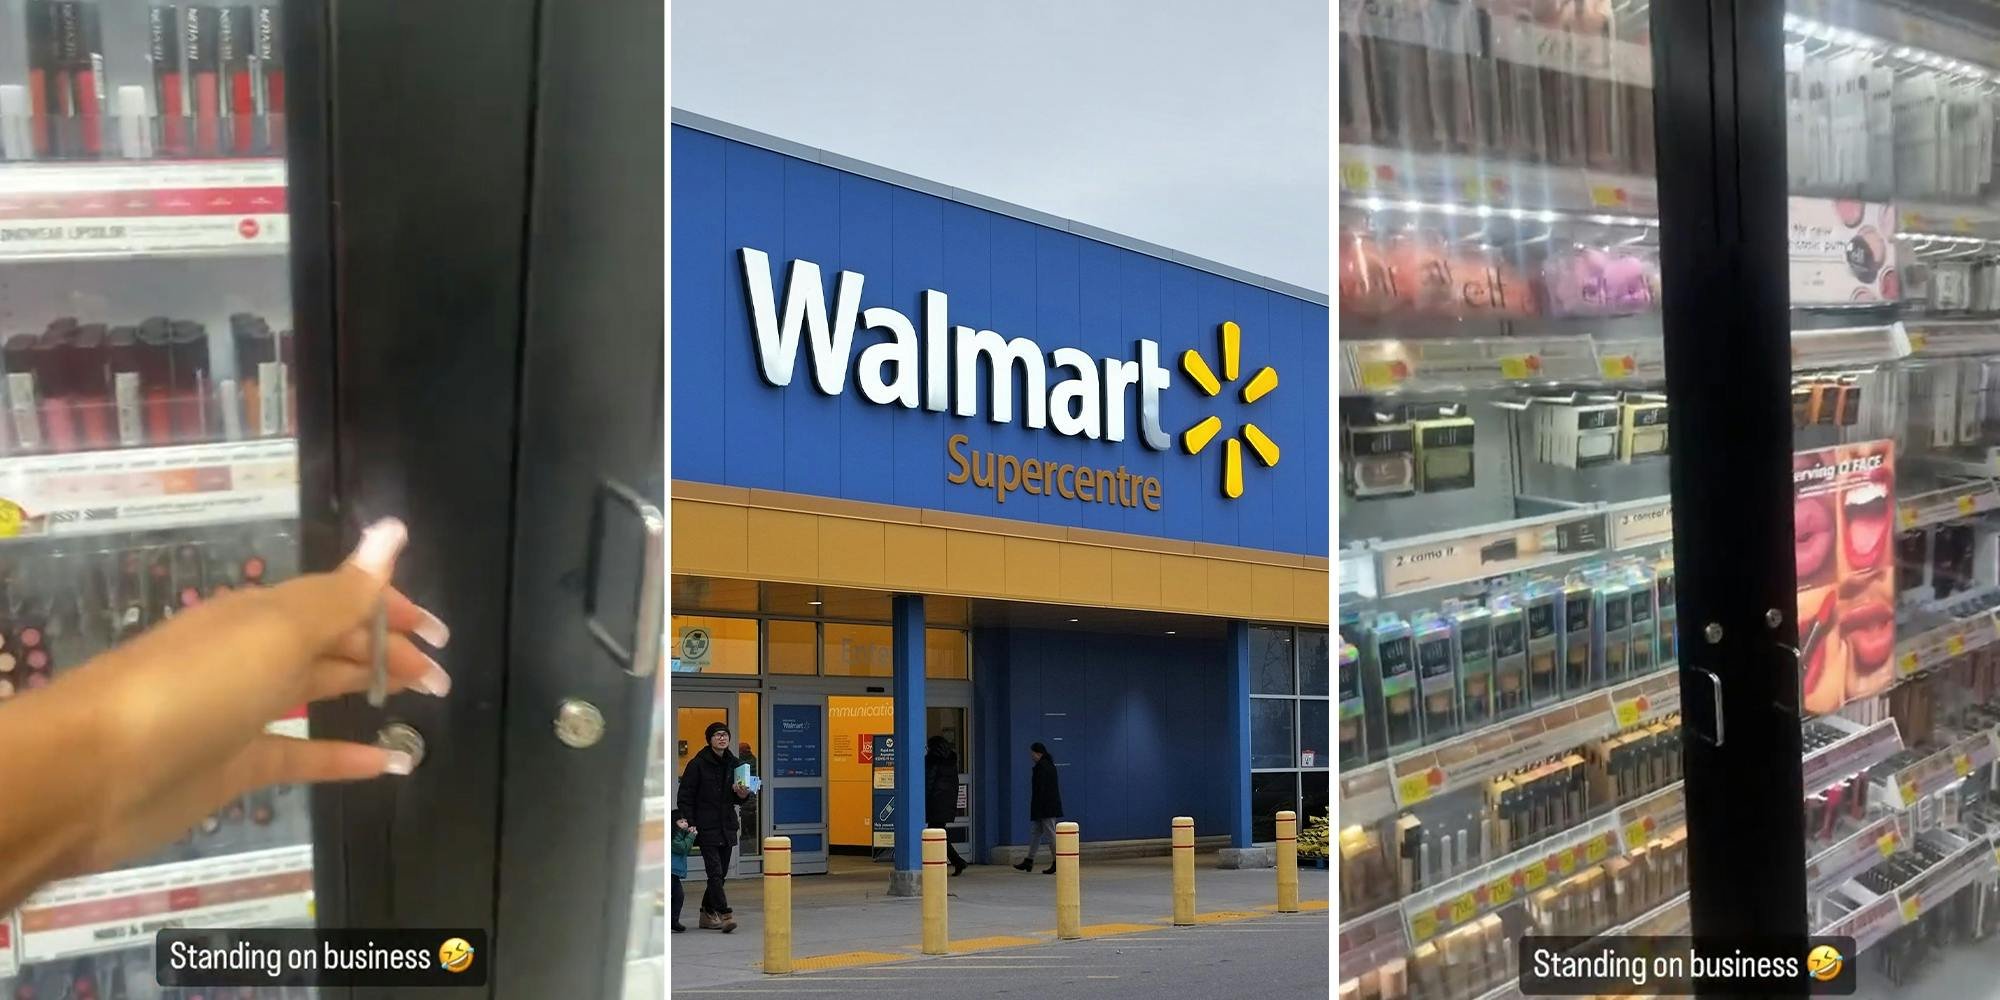 ‘Now im waiting 20+ for a worker to show up’: Walmart shoppers discover entire makeup aisle locked behind glass doors